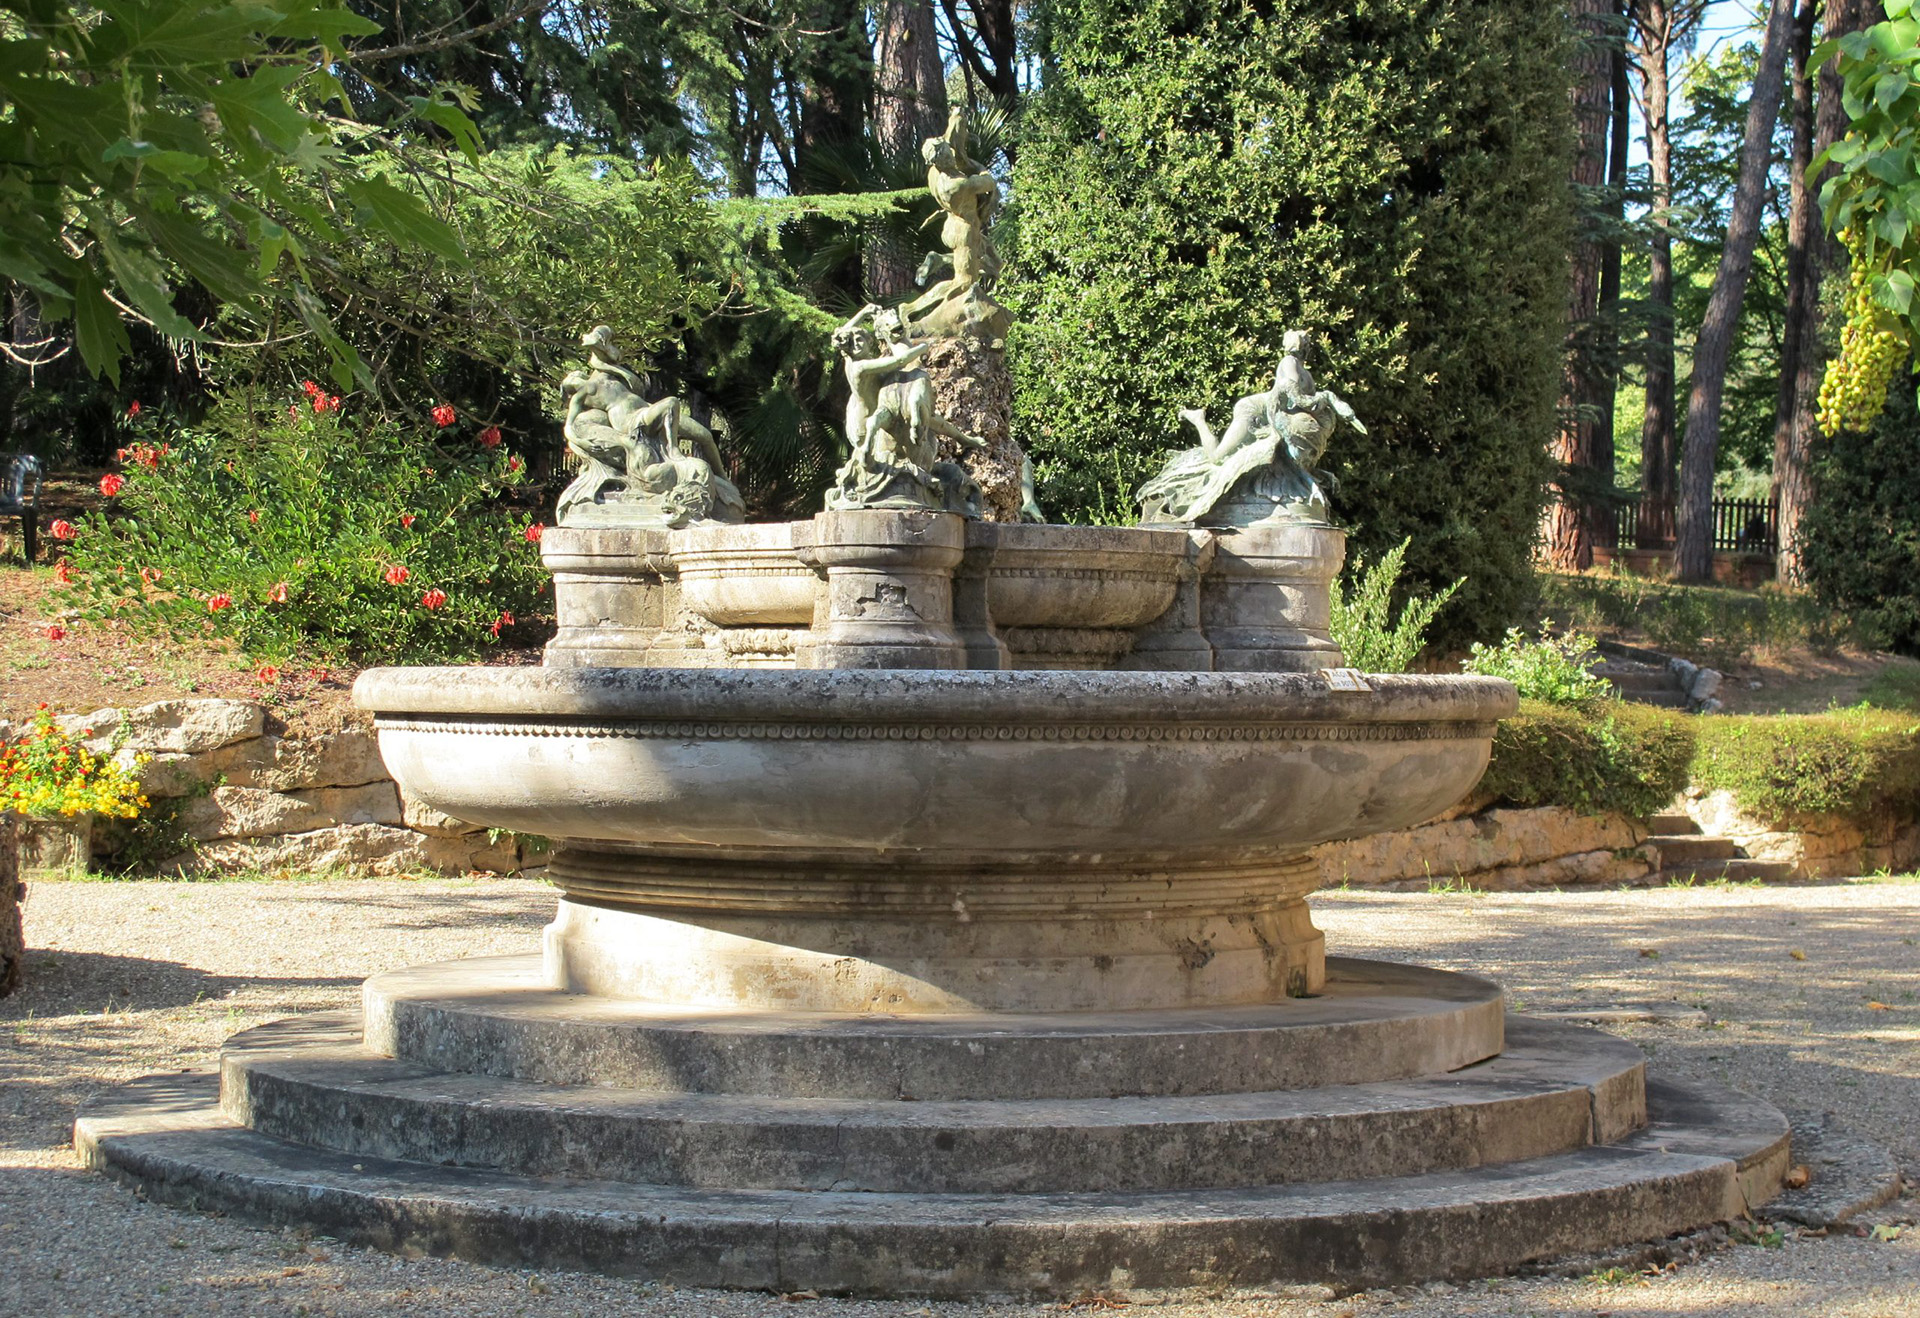 Fountain of the Naiads in the Tamerici spa park